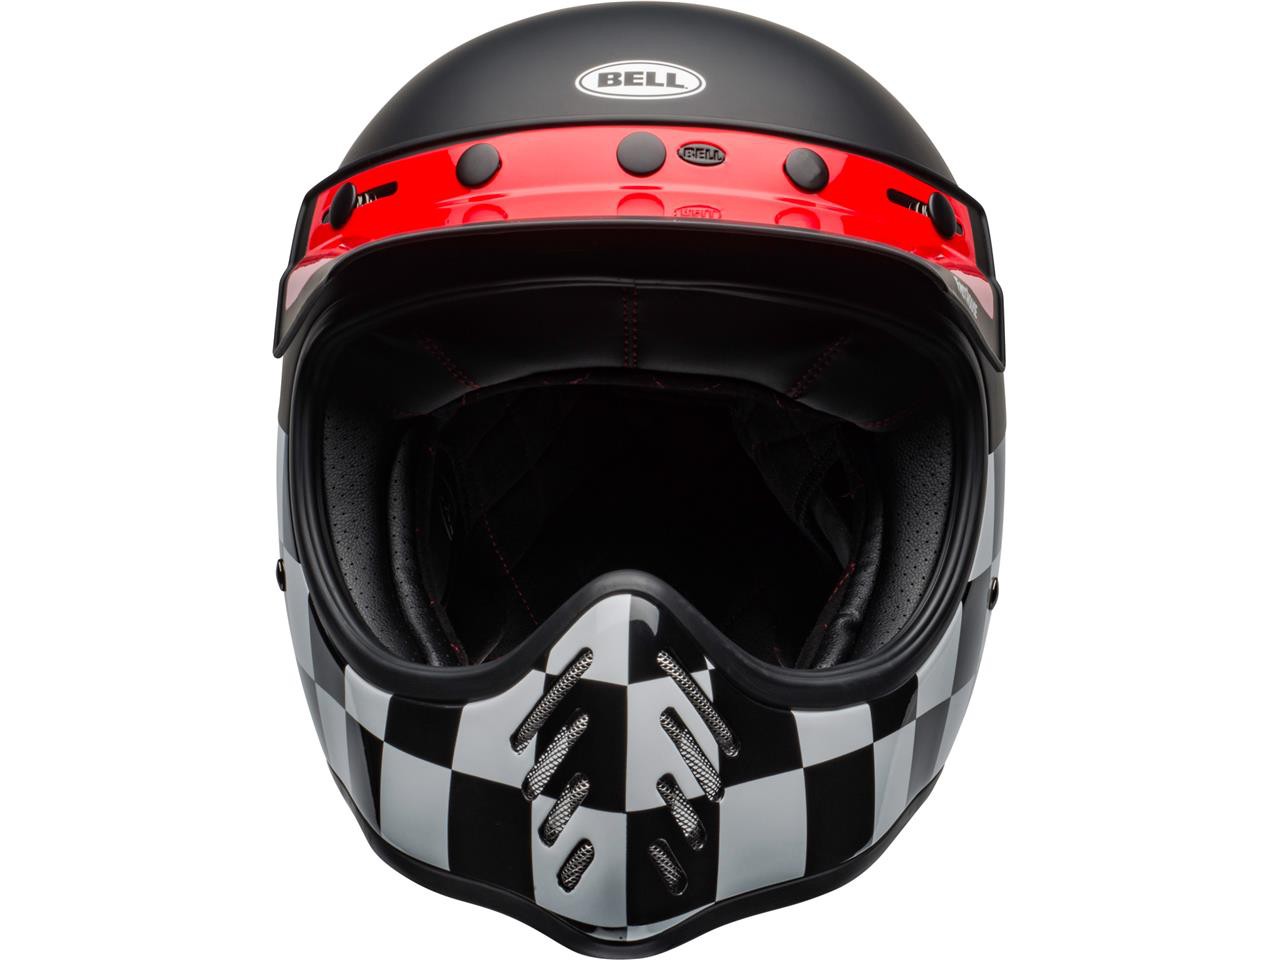 Casque Moto Cross BELL MOTO-3 FASTHOUSE CHECKERS Noir - Blanc - Rouge